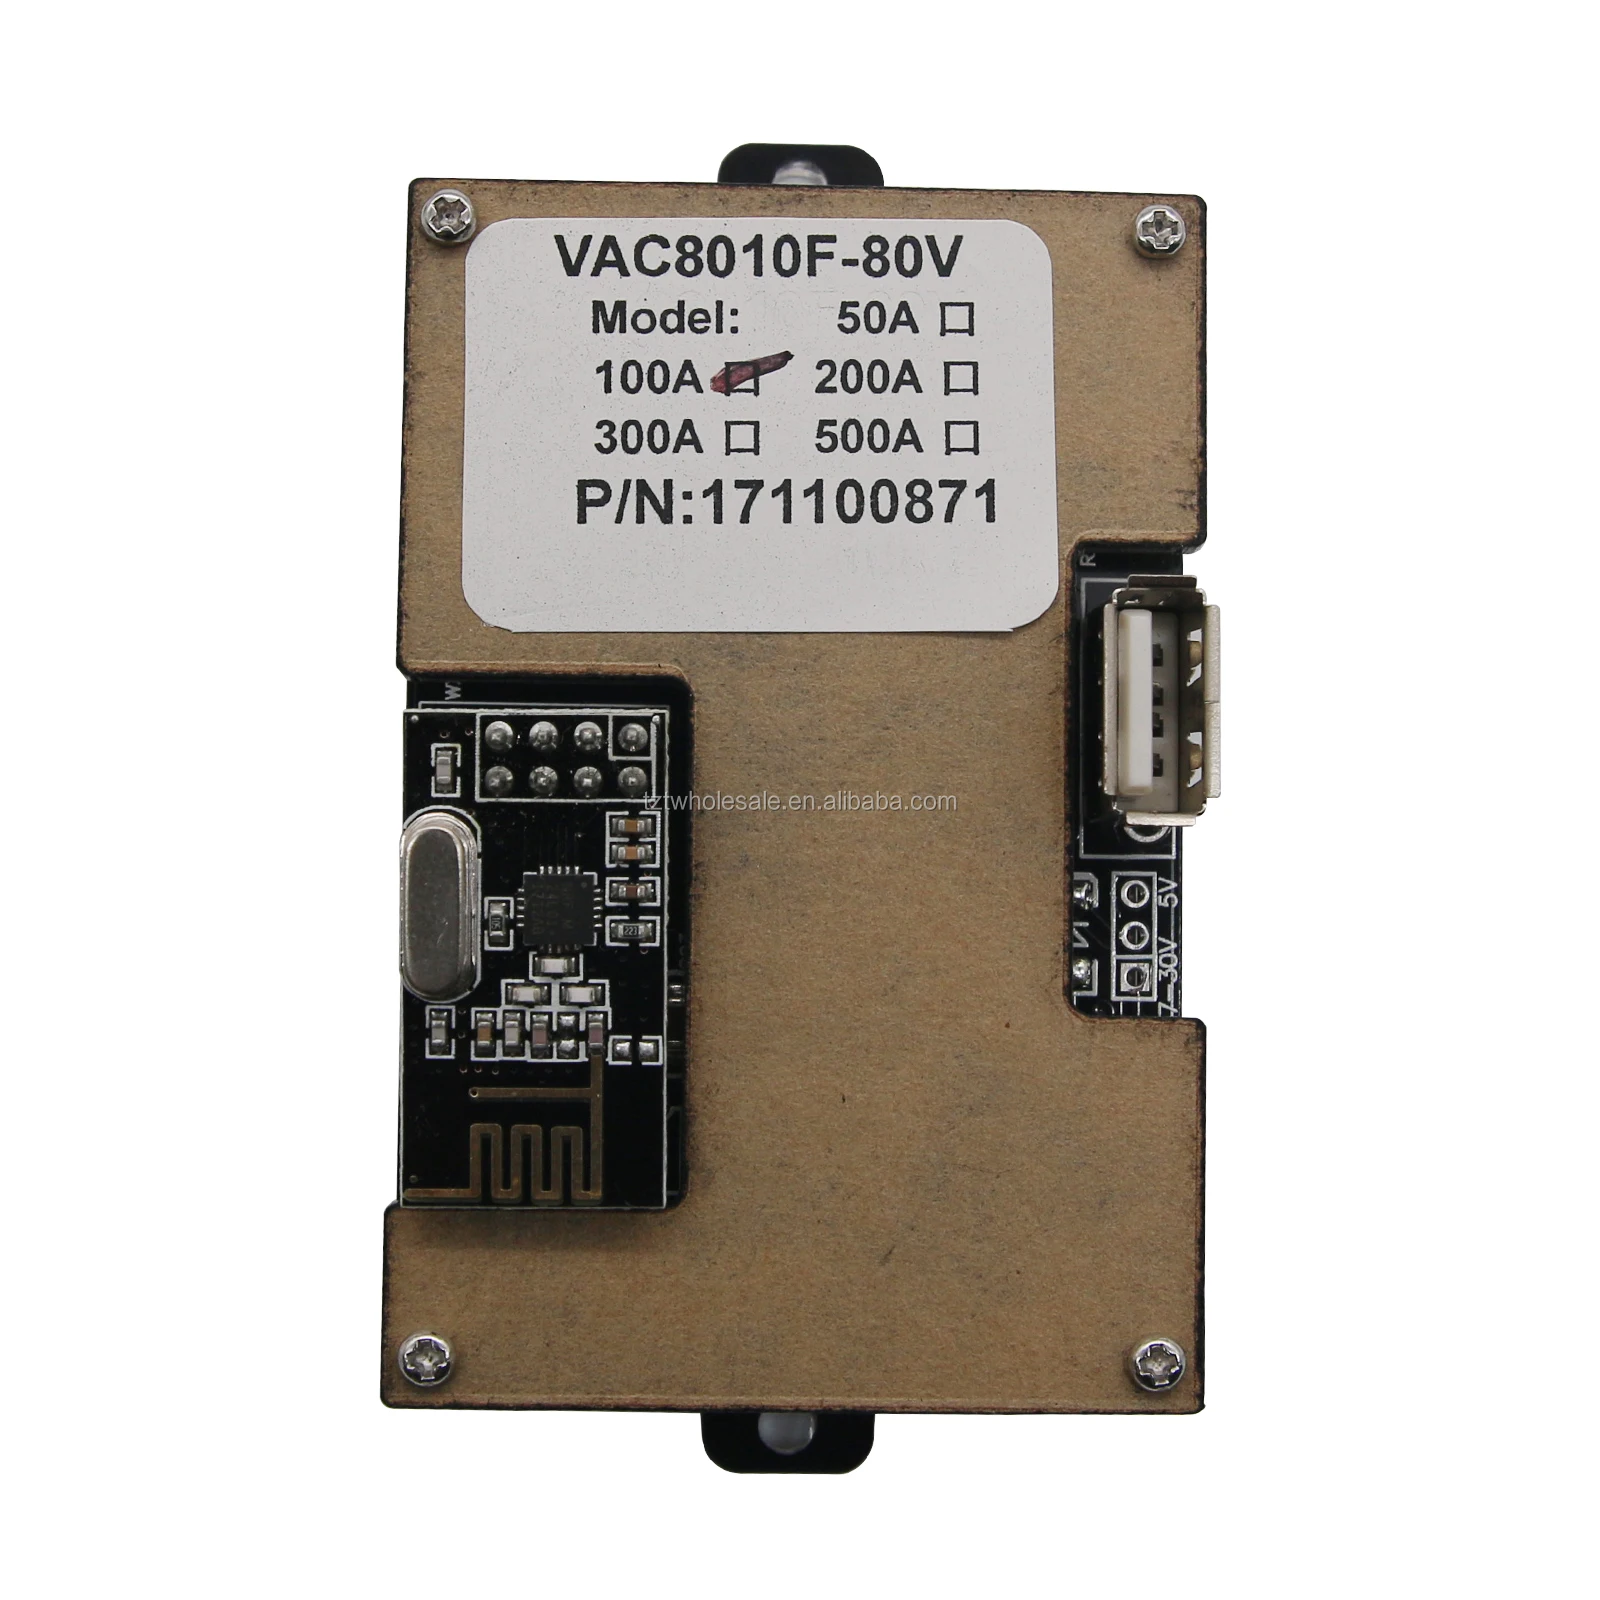 Details about   Battery Monitor Meter Wireless DC 0-80V0-350A AMP AH Remaining Capacity 